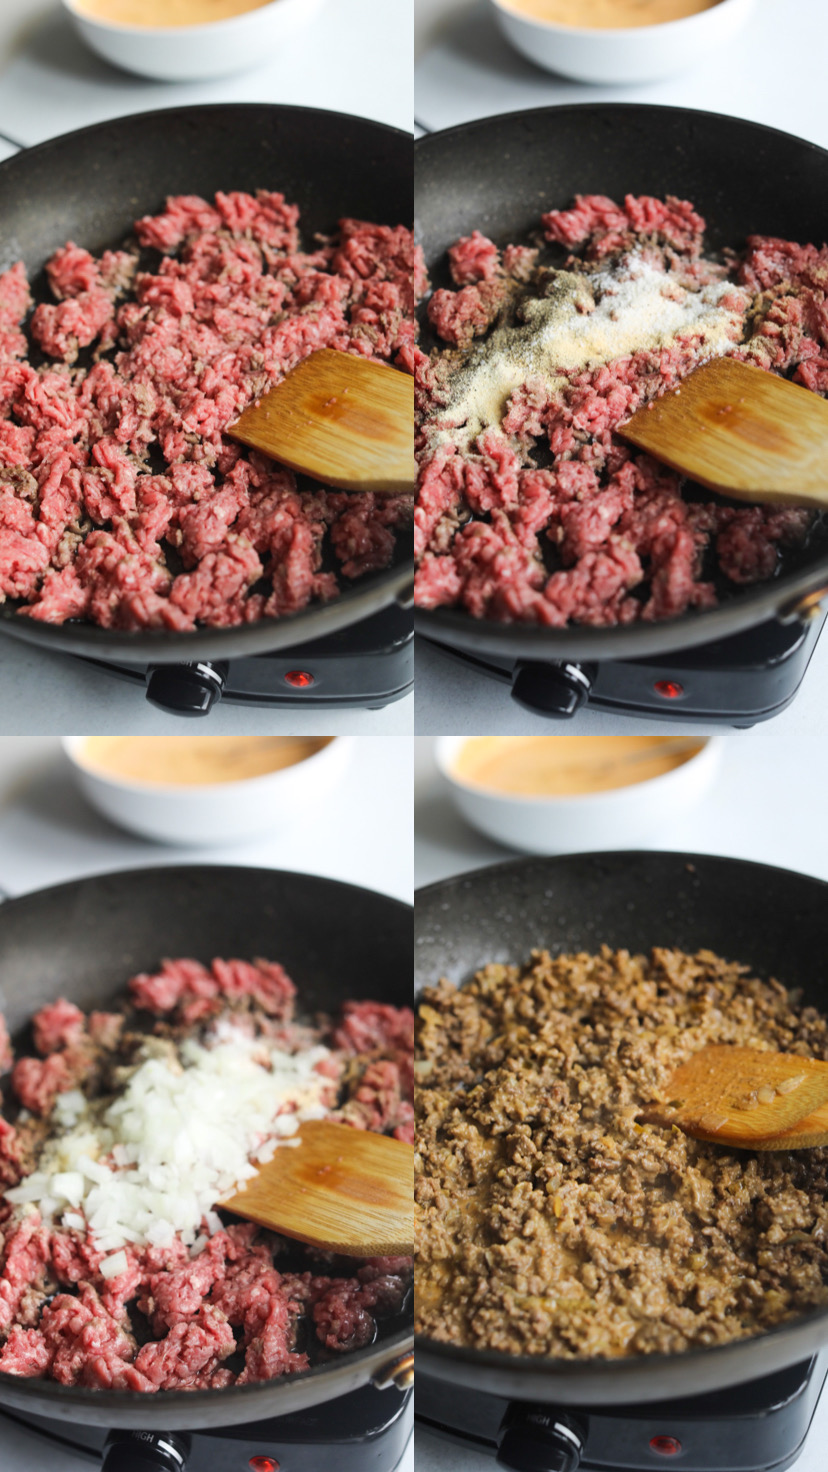 Process shot for Big Mac Sloppy Joe with four photos in a collage showing step-by-step images with ground beef, seasonings, onions and finished image.